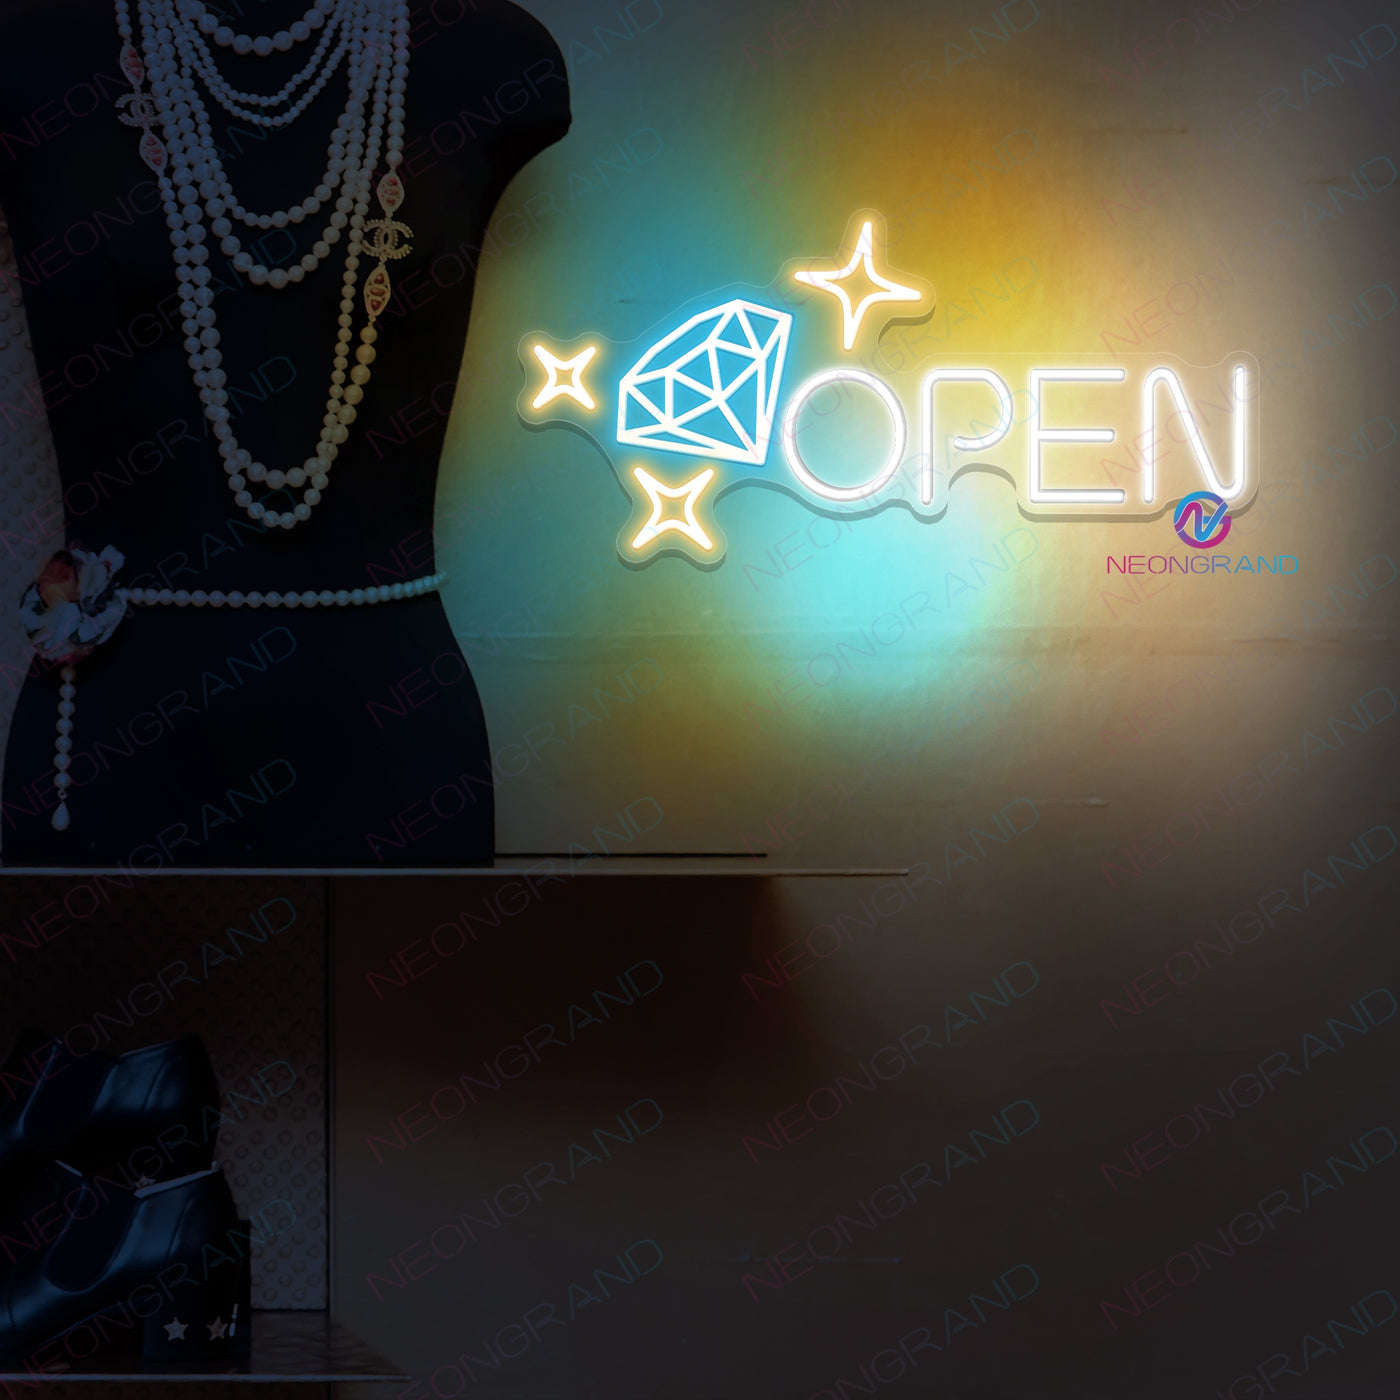 Neon Jewelry Stores Open Sign Business Led Light